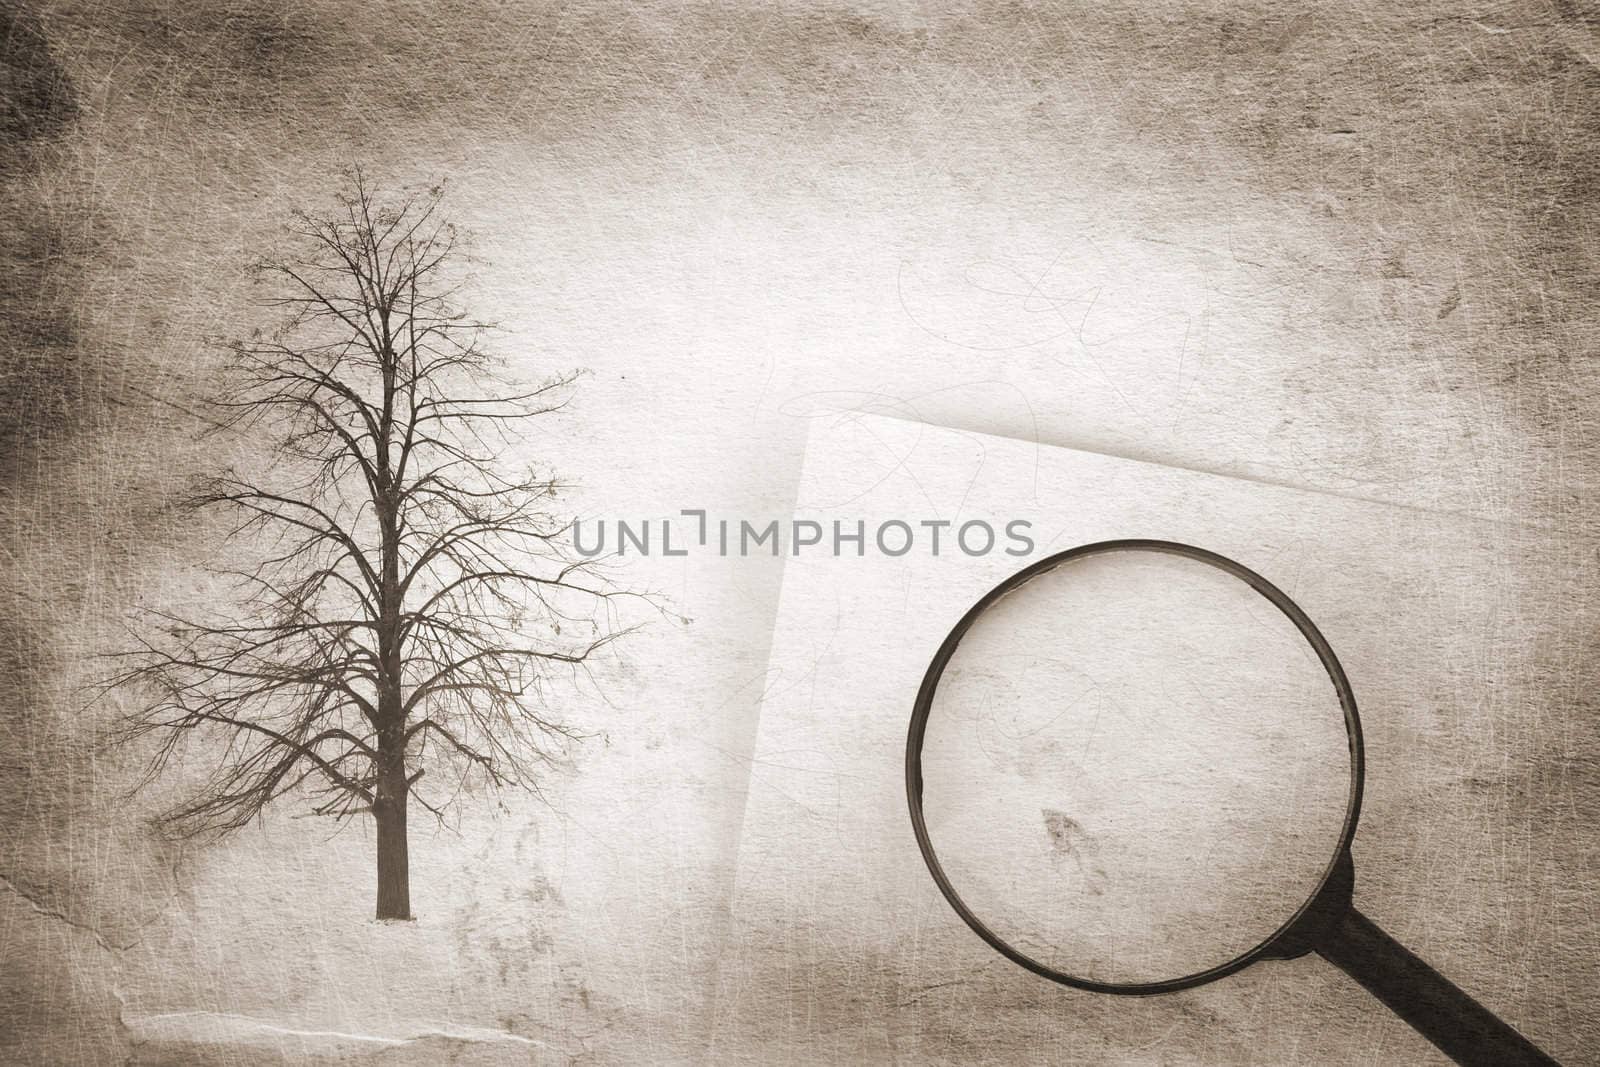 special paper texture ,toned and grunge f/x,made from my images